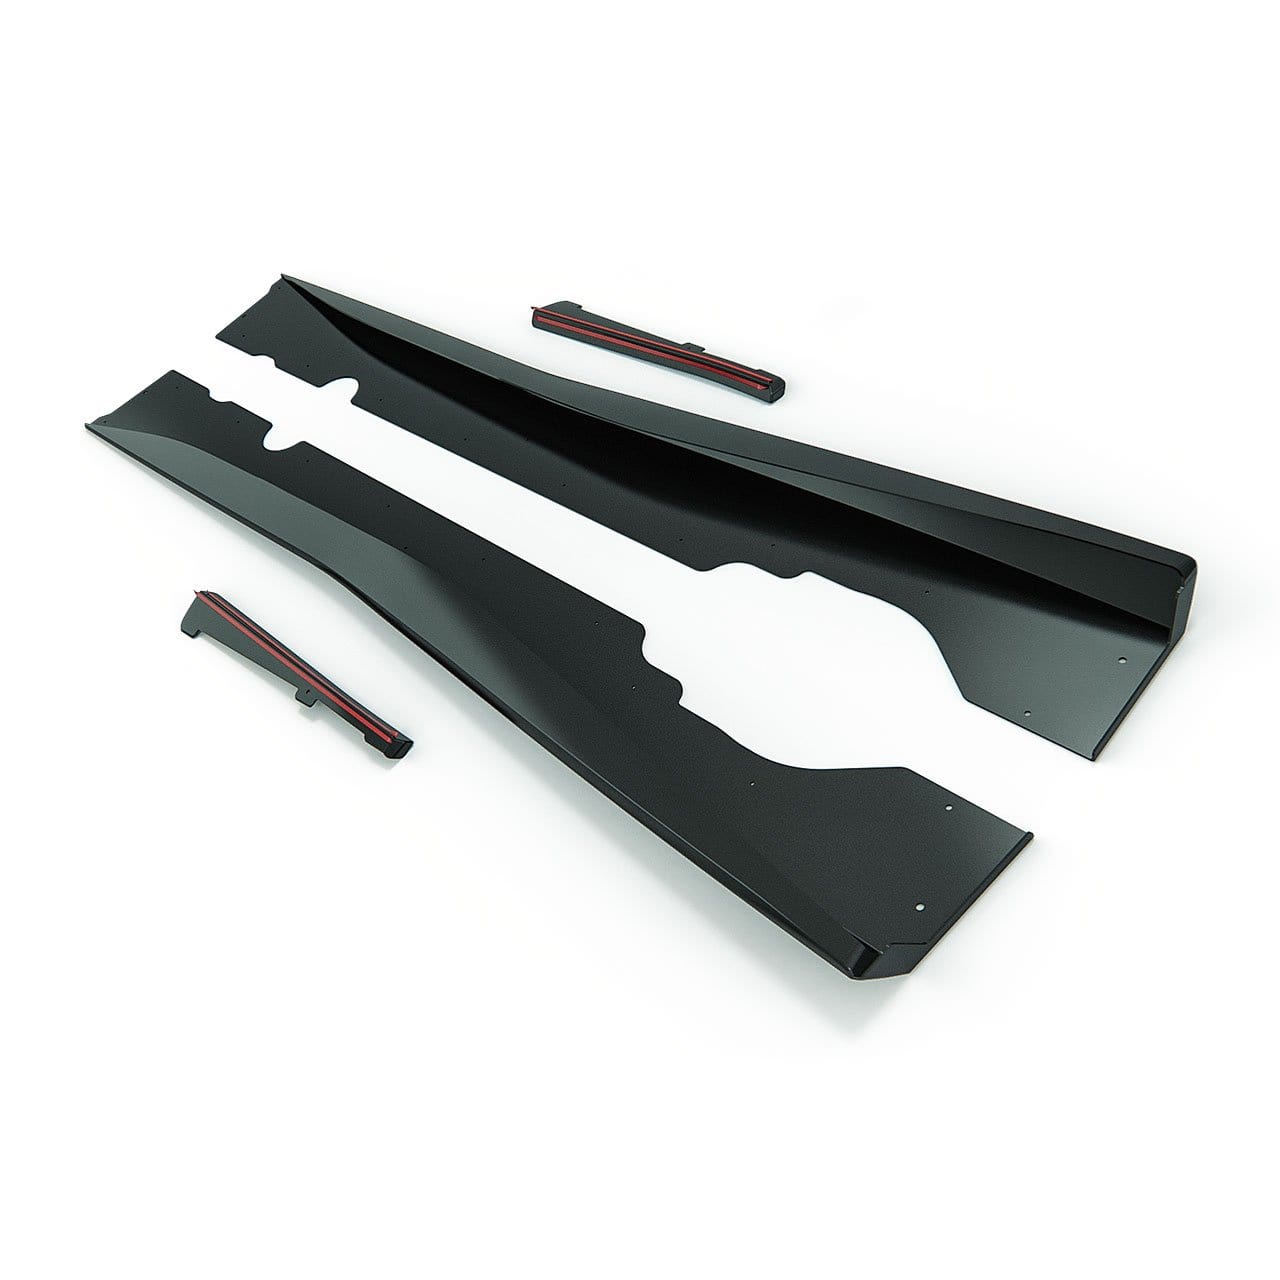 ACS Composite 1VM Rockers in Carbon Flash Black for C8 Corvette Stingray [50-4-035]CFZ - extended undertray paneling, wingless side skirt, heat-resistant PC composite material.